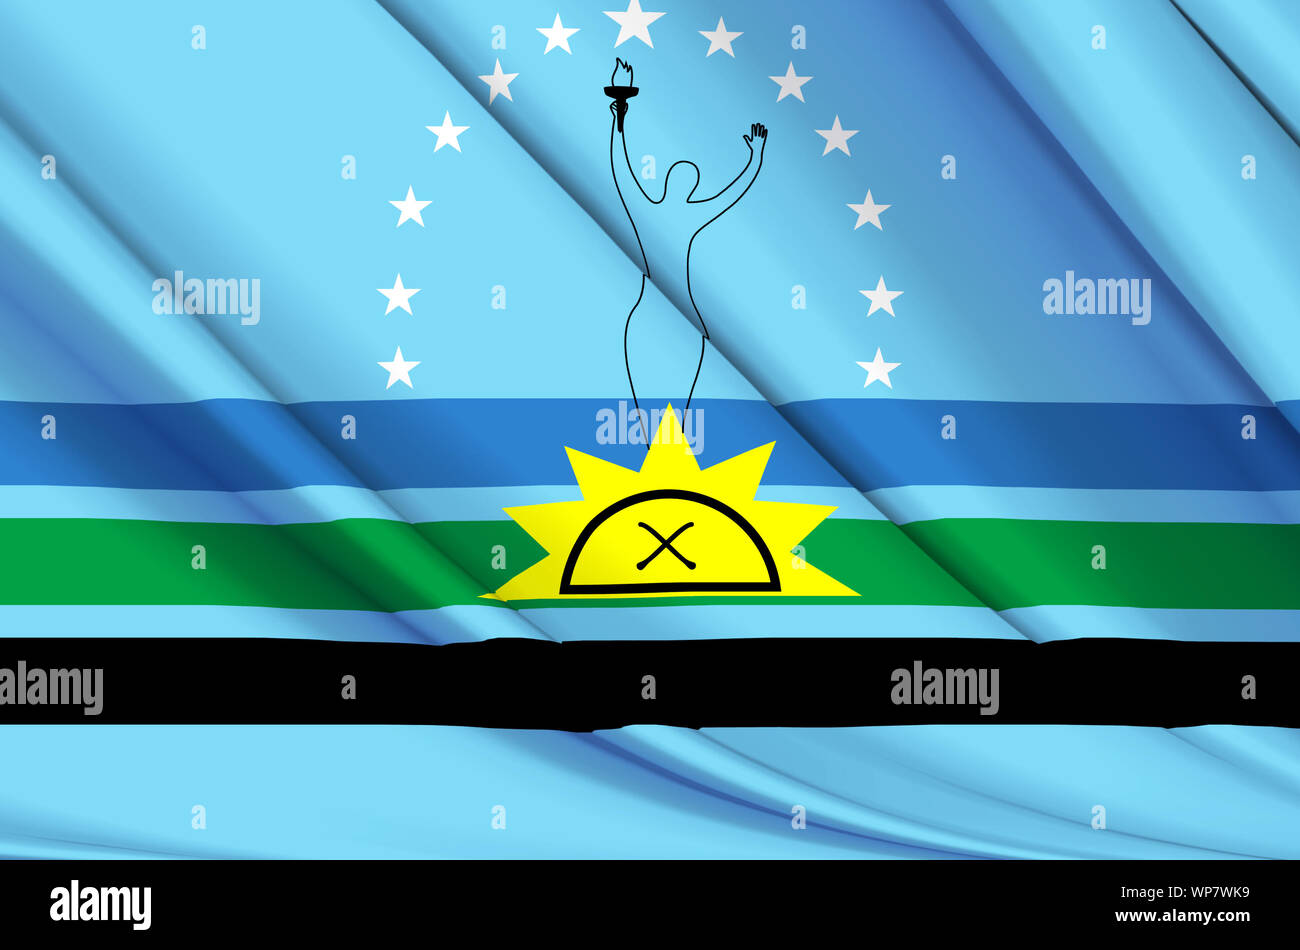 Monagas waving flag illustration. Regions of Venezuela. Perfect for background and texture usage. Stock Photo